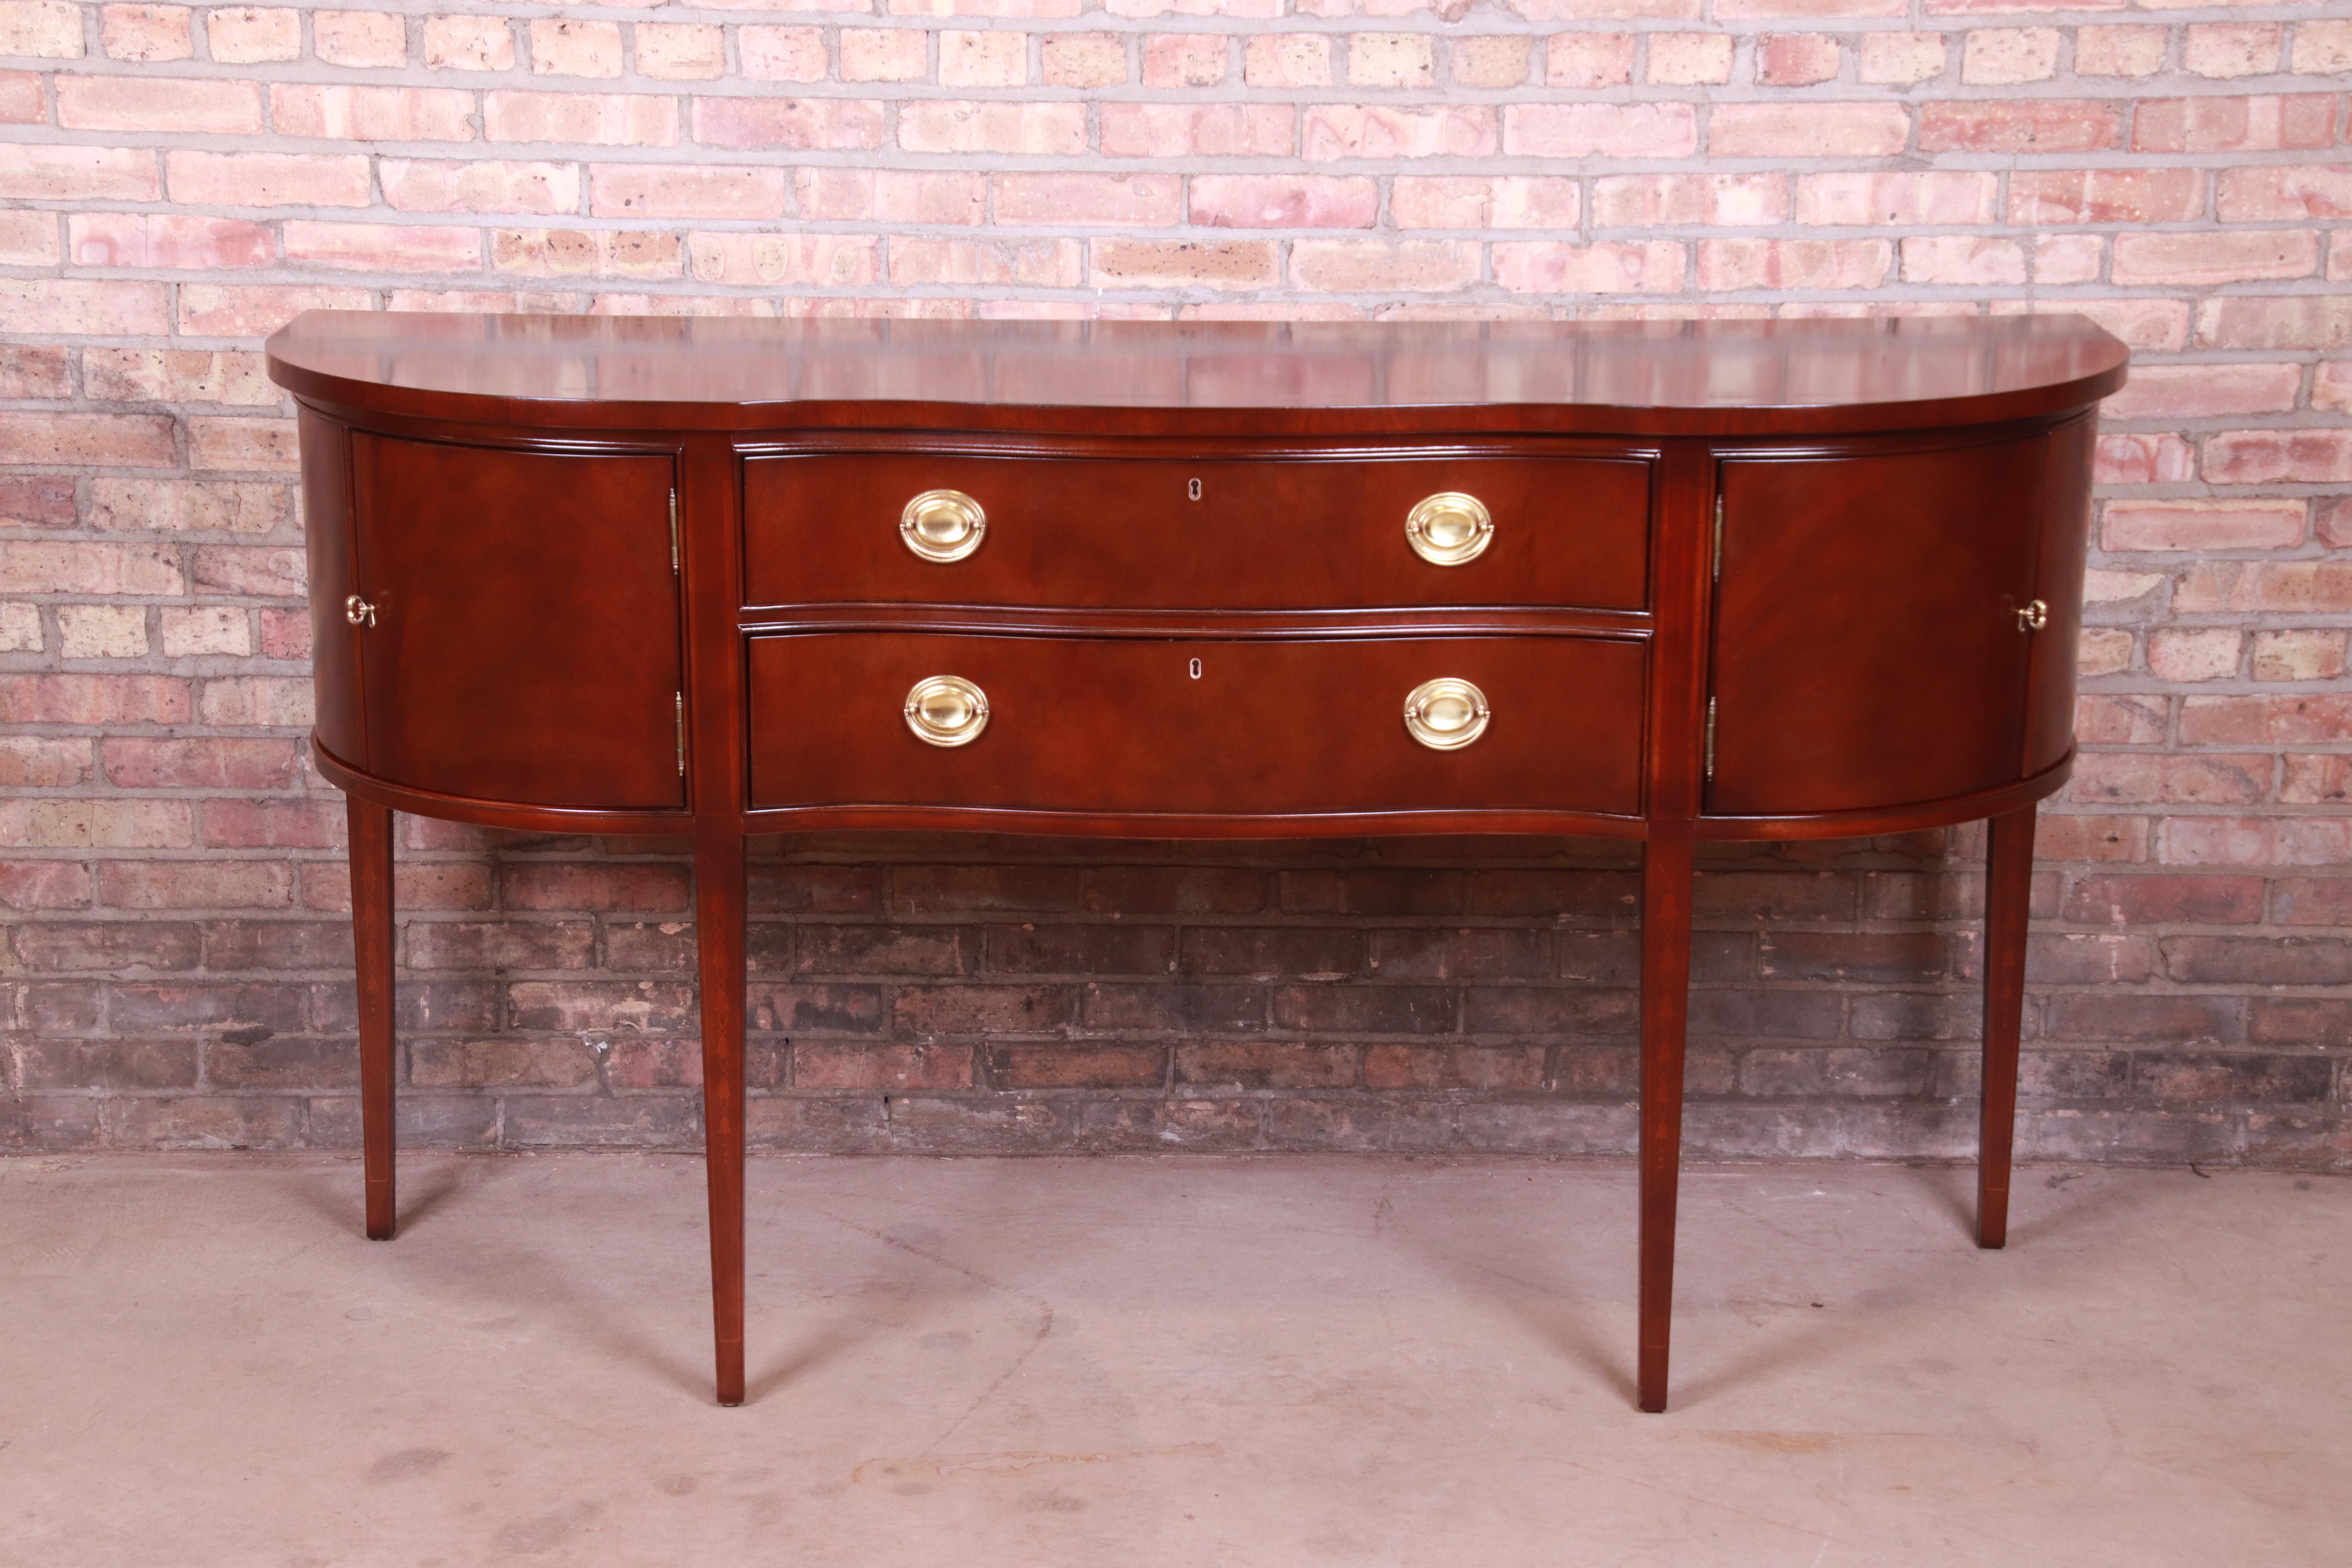 A gorgeous Hepplewhite or Federal style sideboard buffet or bar server

By Bernhardt Furniture 